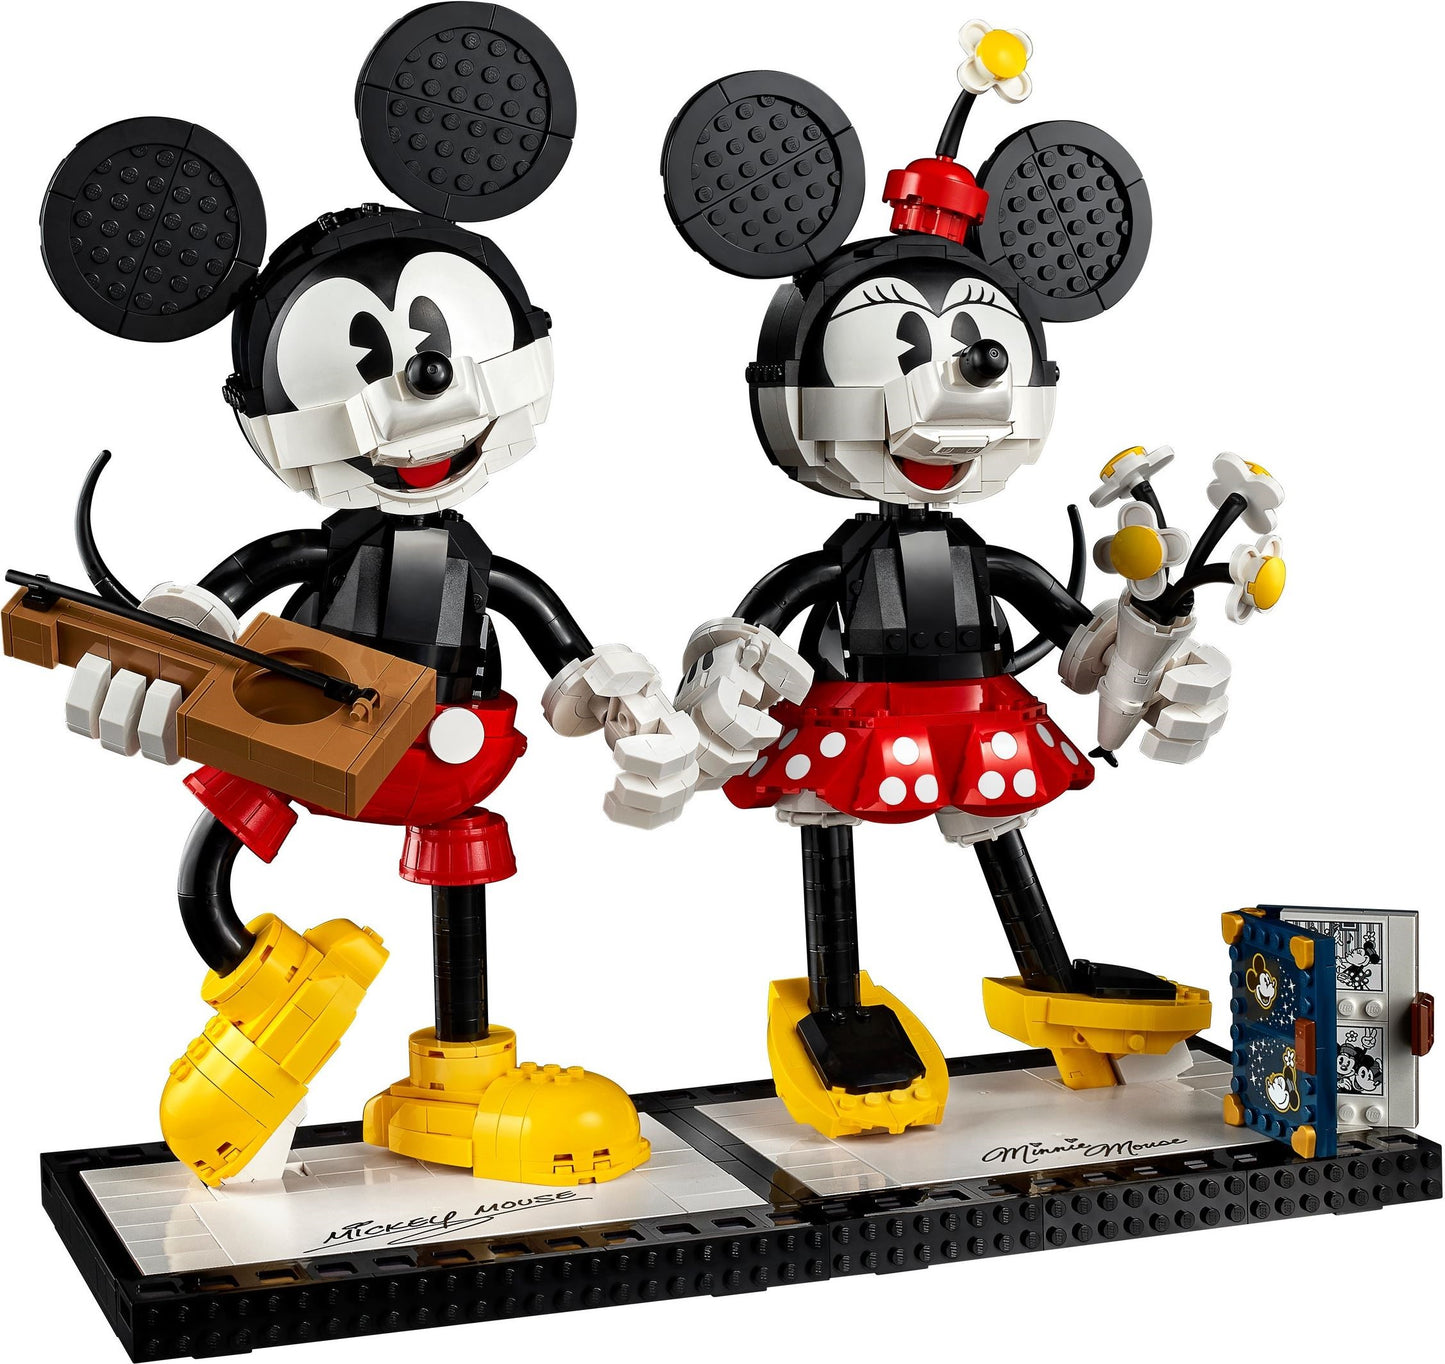 Mickey Mouse & Minnie Mouse personages